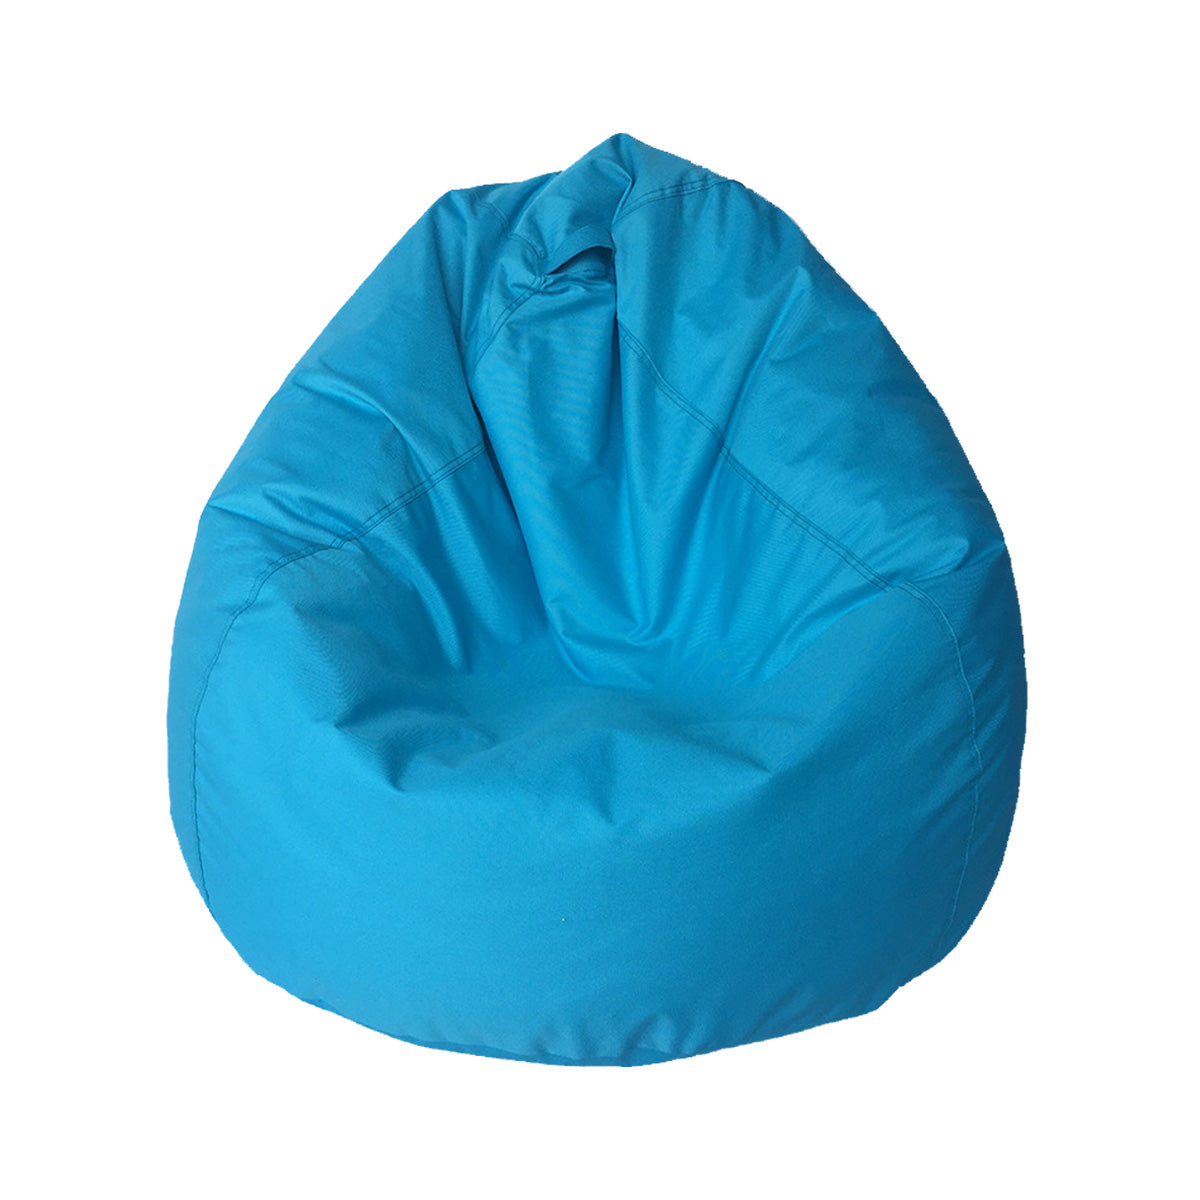 Waterproof Bean Bag Chair Cover Sofa Seat Polyester Indoor Outdoor For Adult